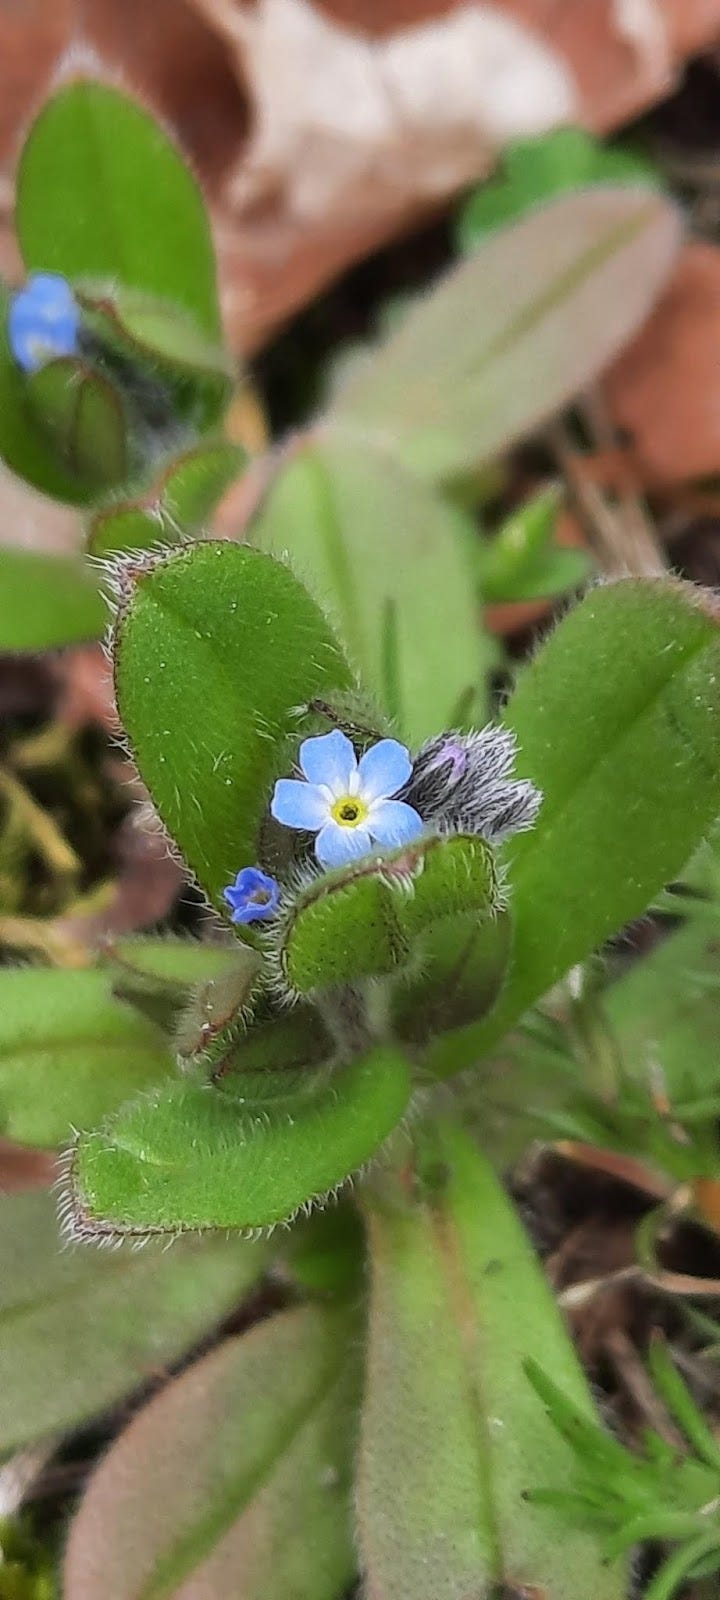 A tiny pale blue flower peaking out from green leaves.